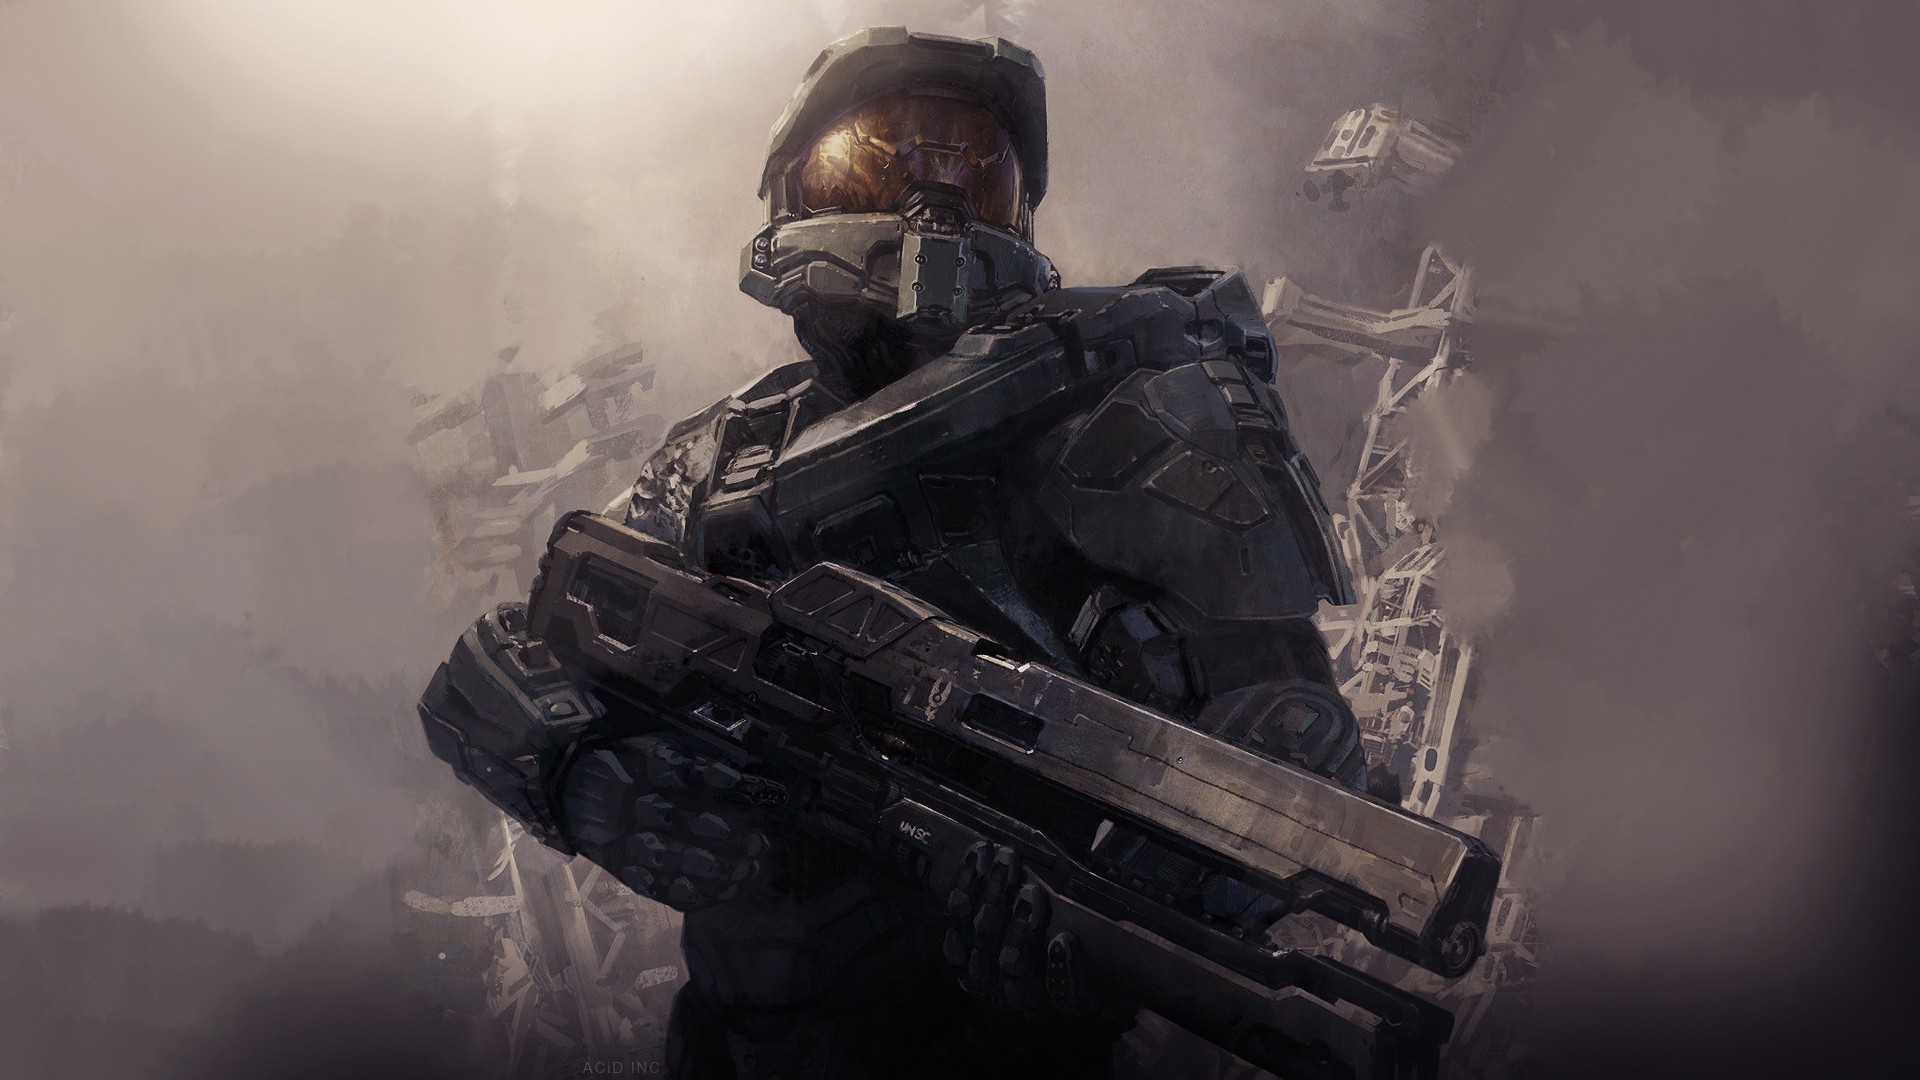 General 1920x1080 video games video game art science fiction weapon Halo 3 Master Chief (Halo)